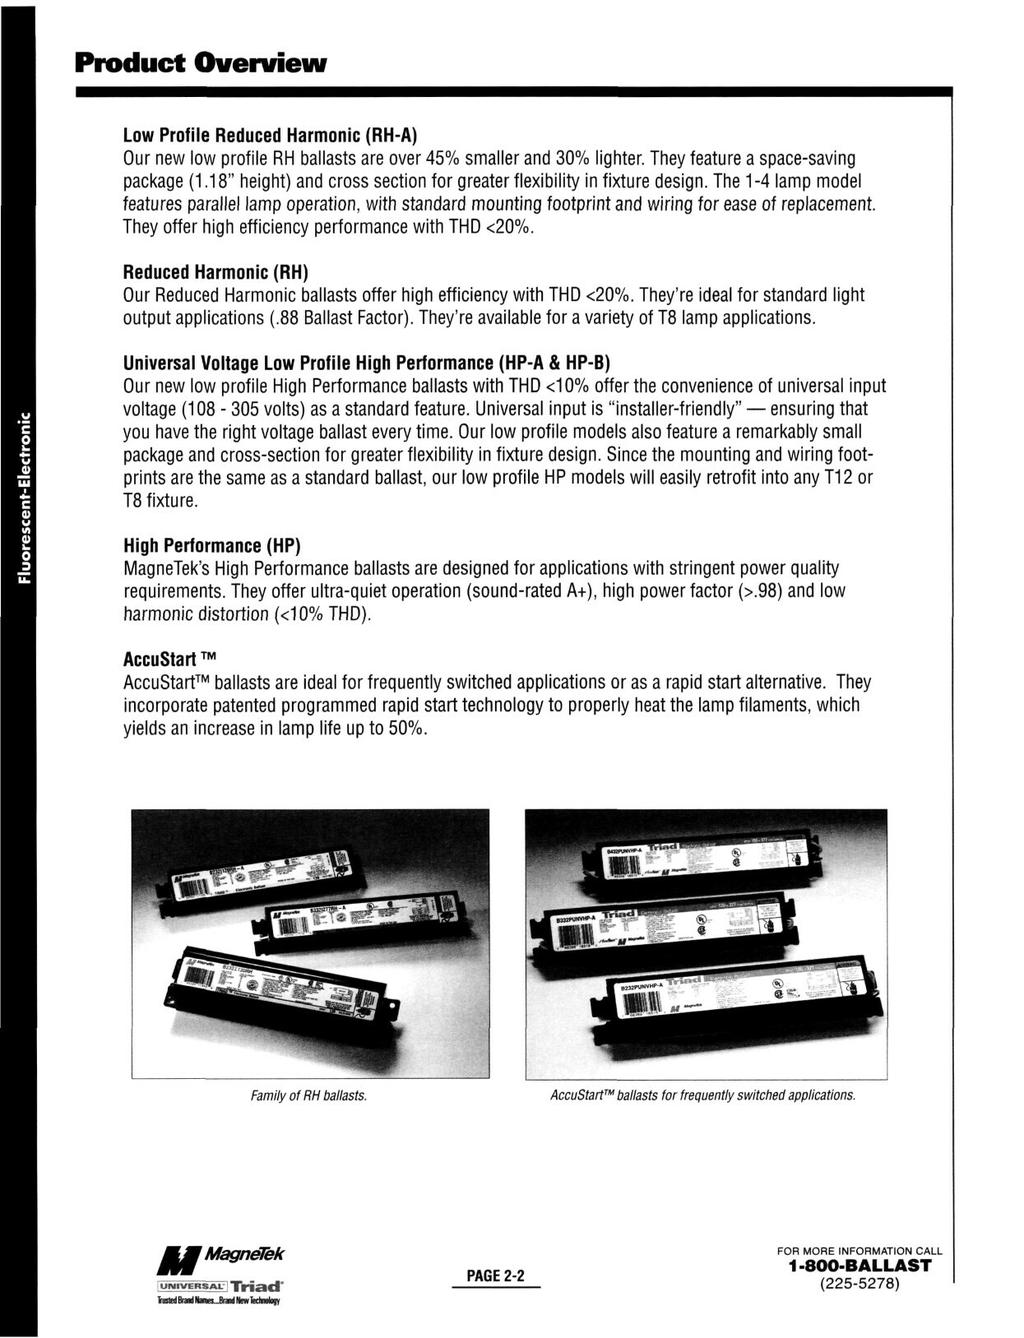 Product Overview Low Profile Reduced Harmonic (RH) Our new low profile RH ballasts are over 45% smaller and 30% lighter. They feature a space-saving package (1.